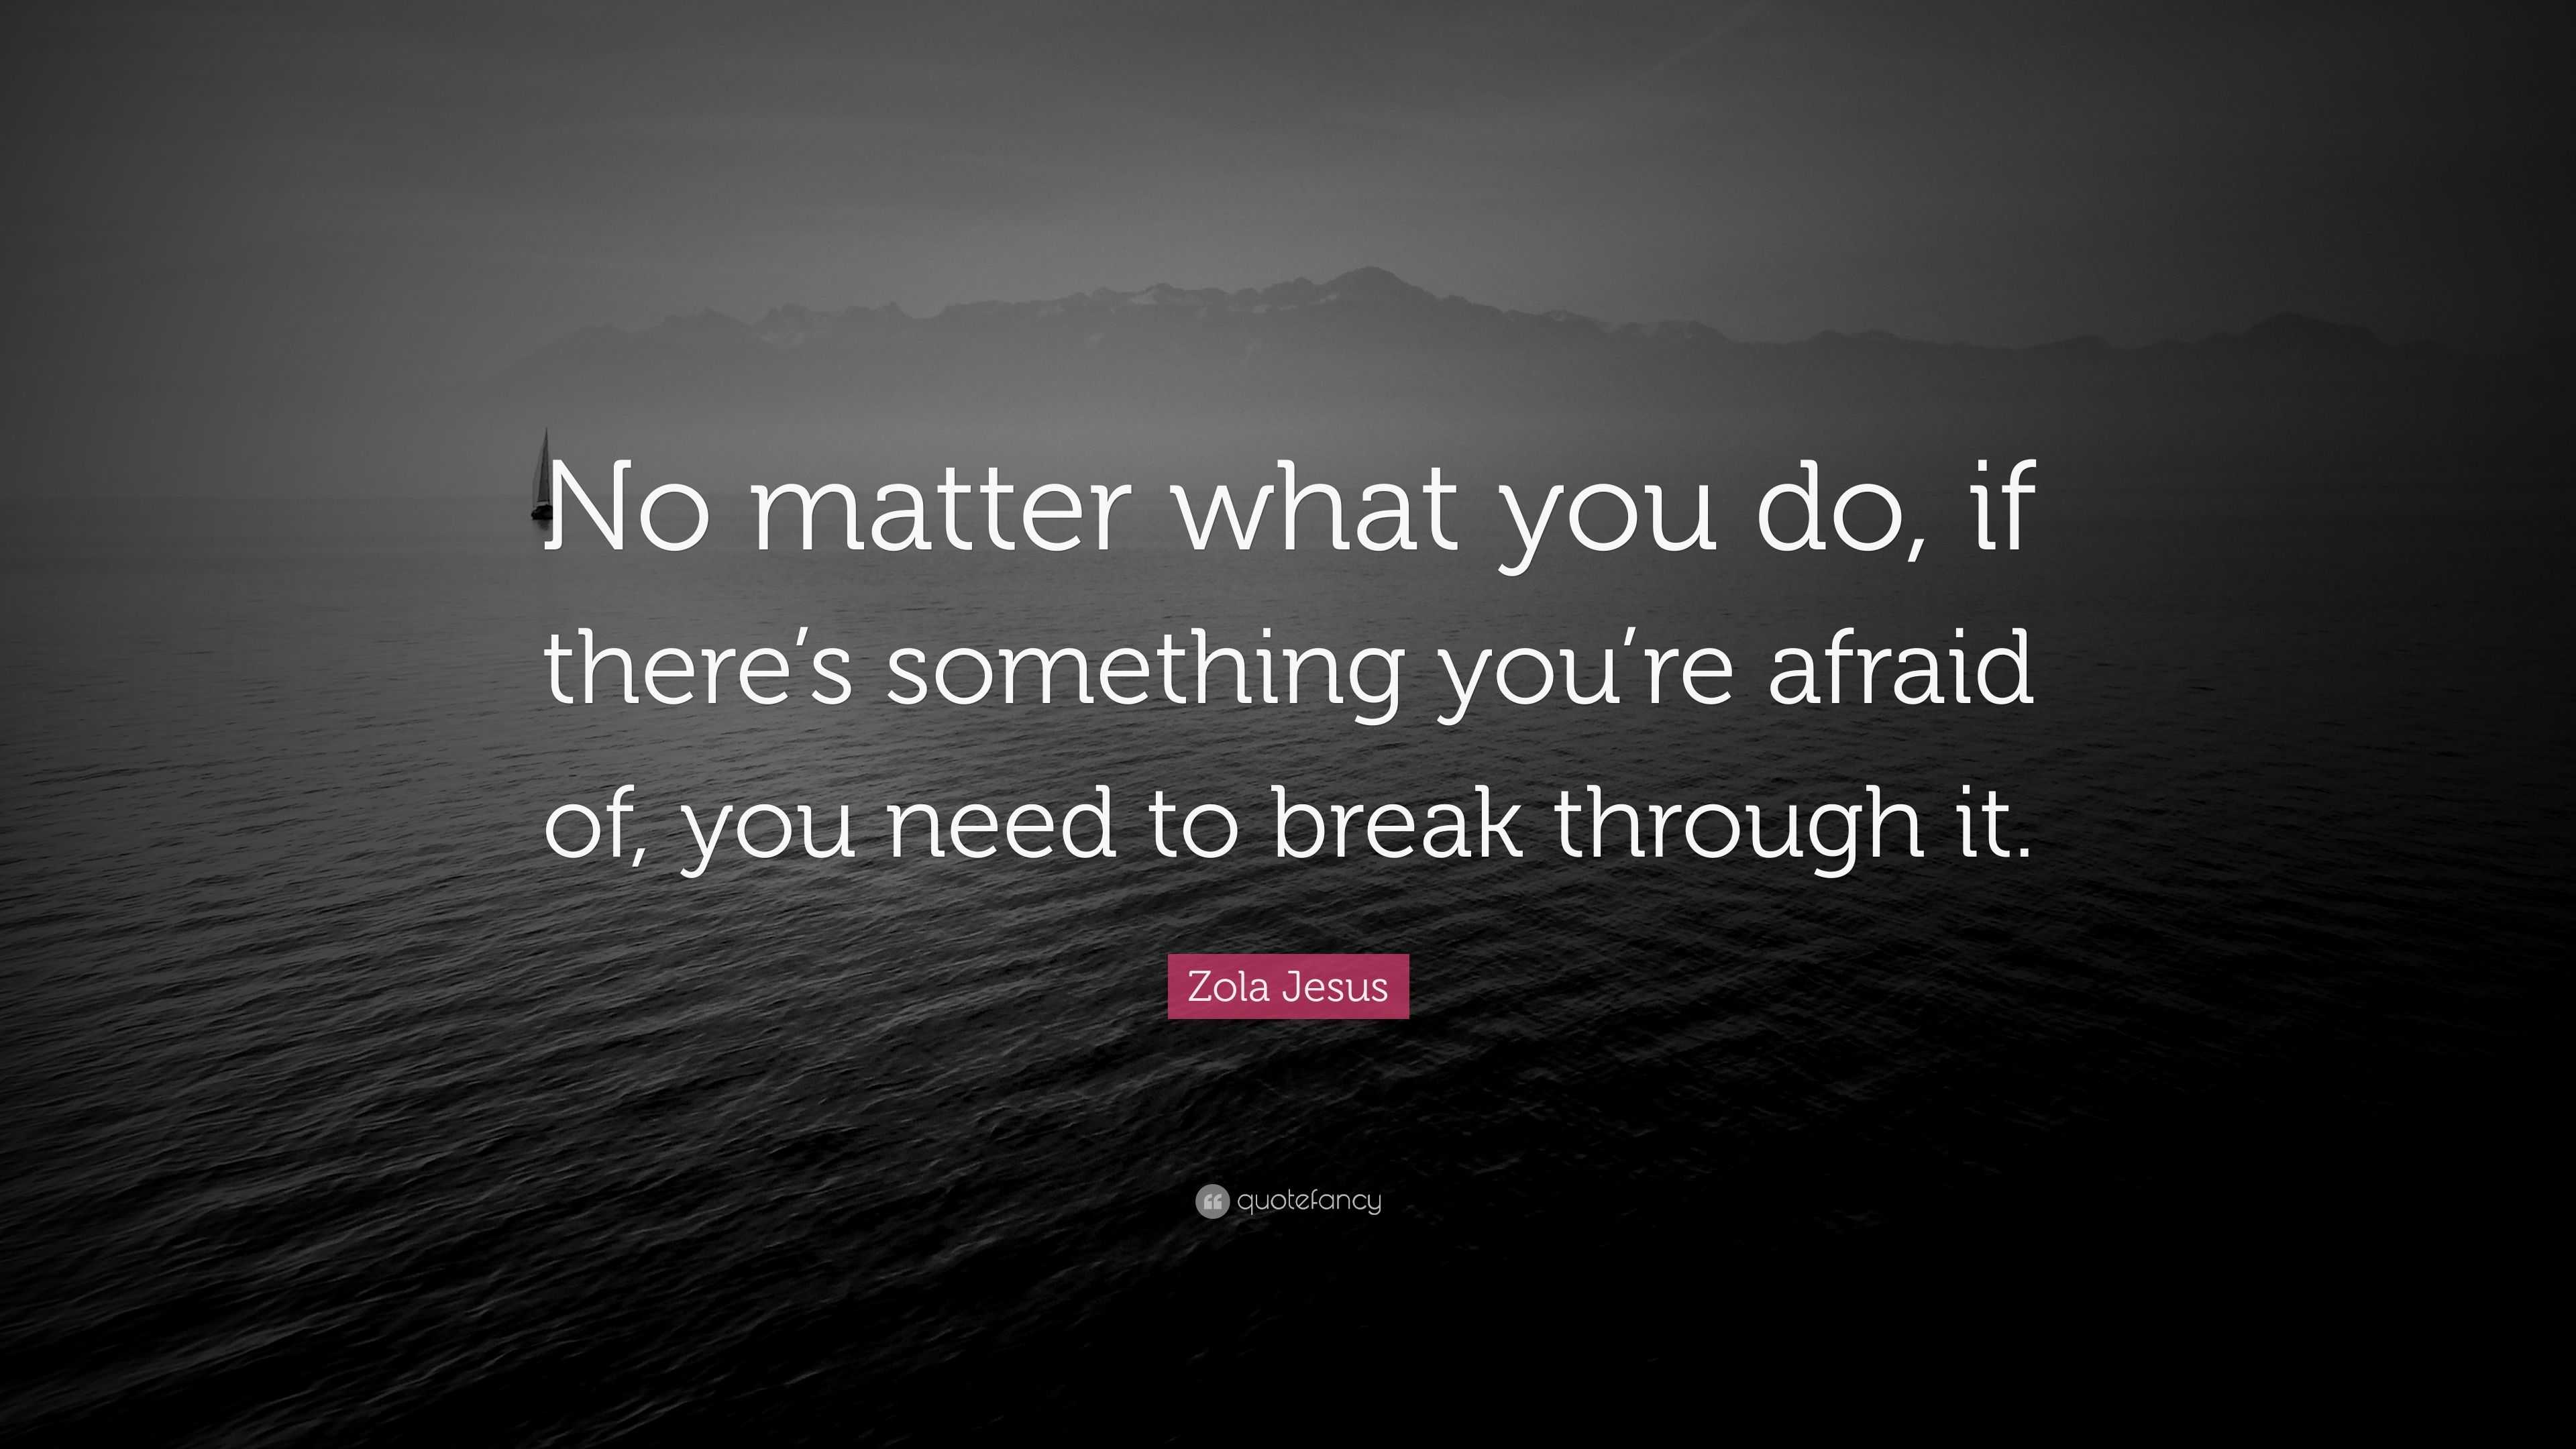 Zola Jesus Quote: “No matter what you do, if there’s something you’re ...